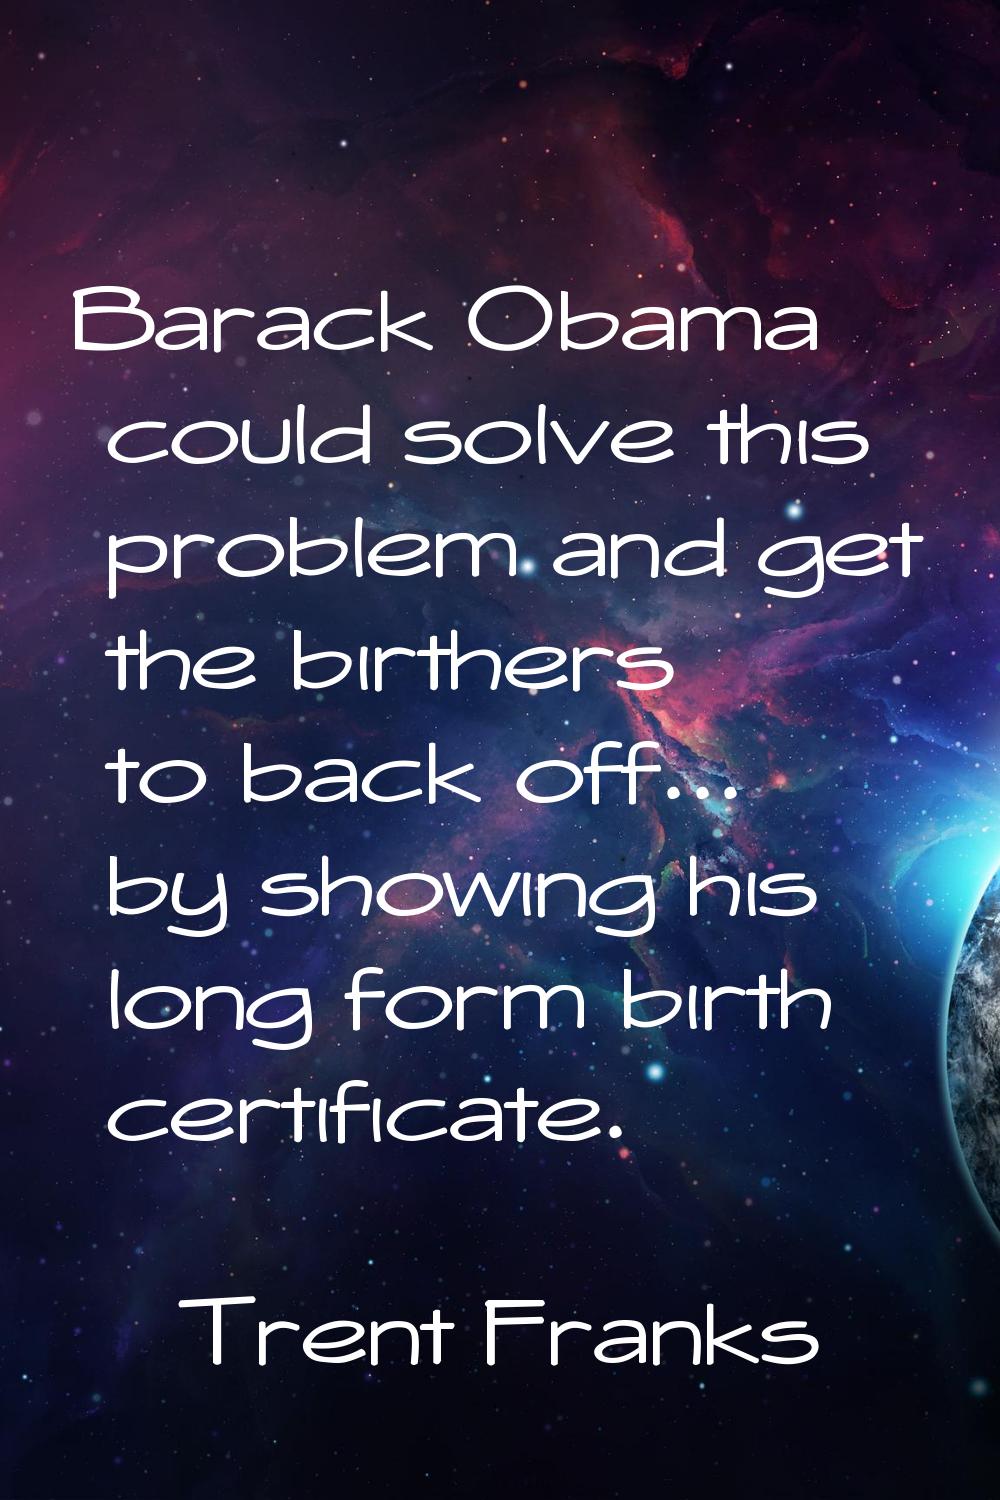 Barack Obama could solve this problem and get the birthers to back off... by showing his long form 